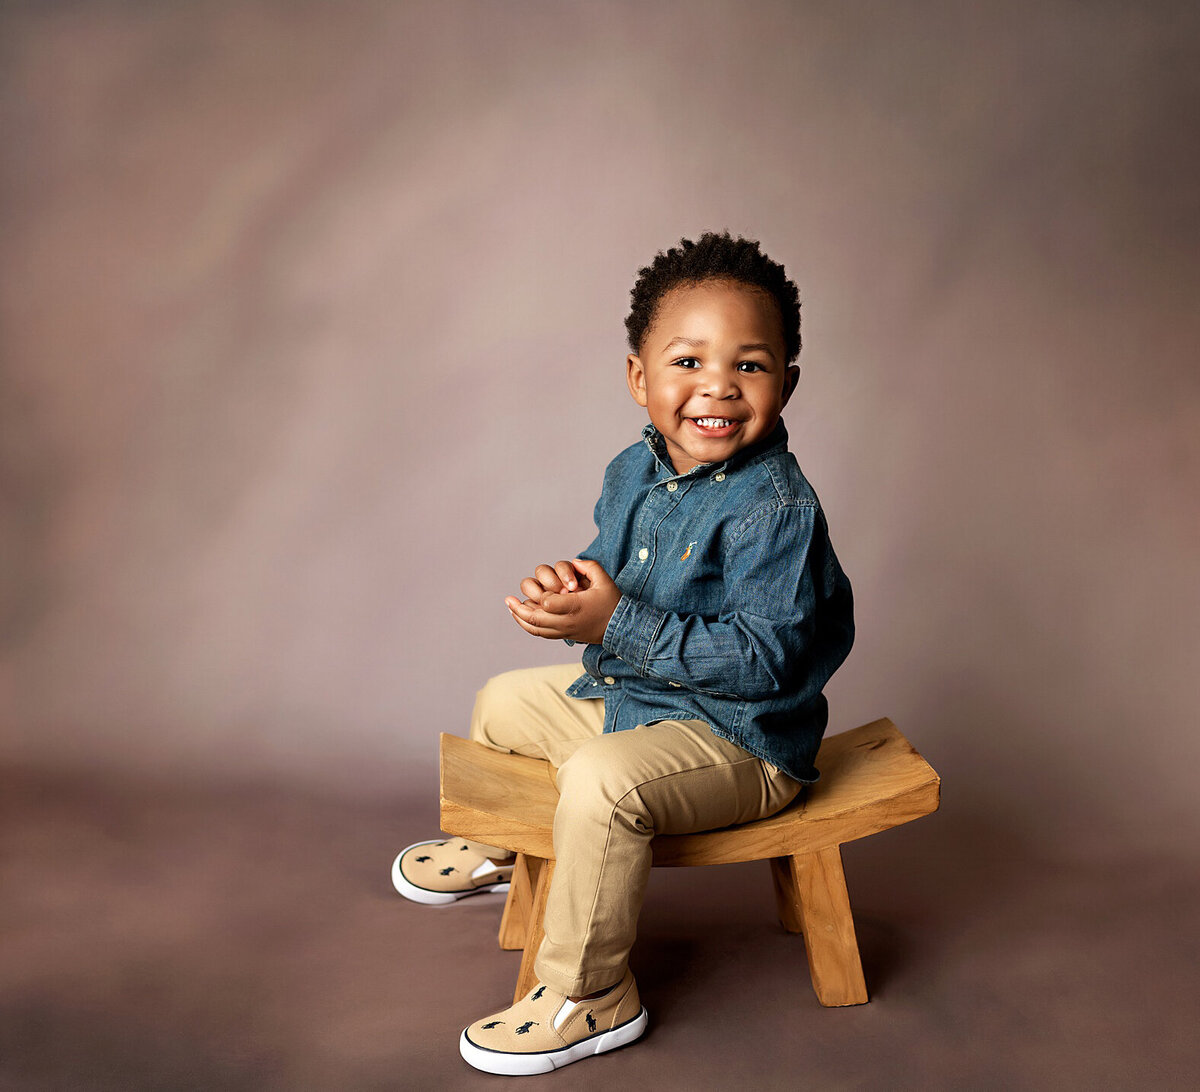 A enchanting child session, capturing the child's genuine expressions and emotions.